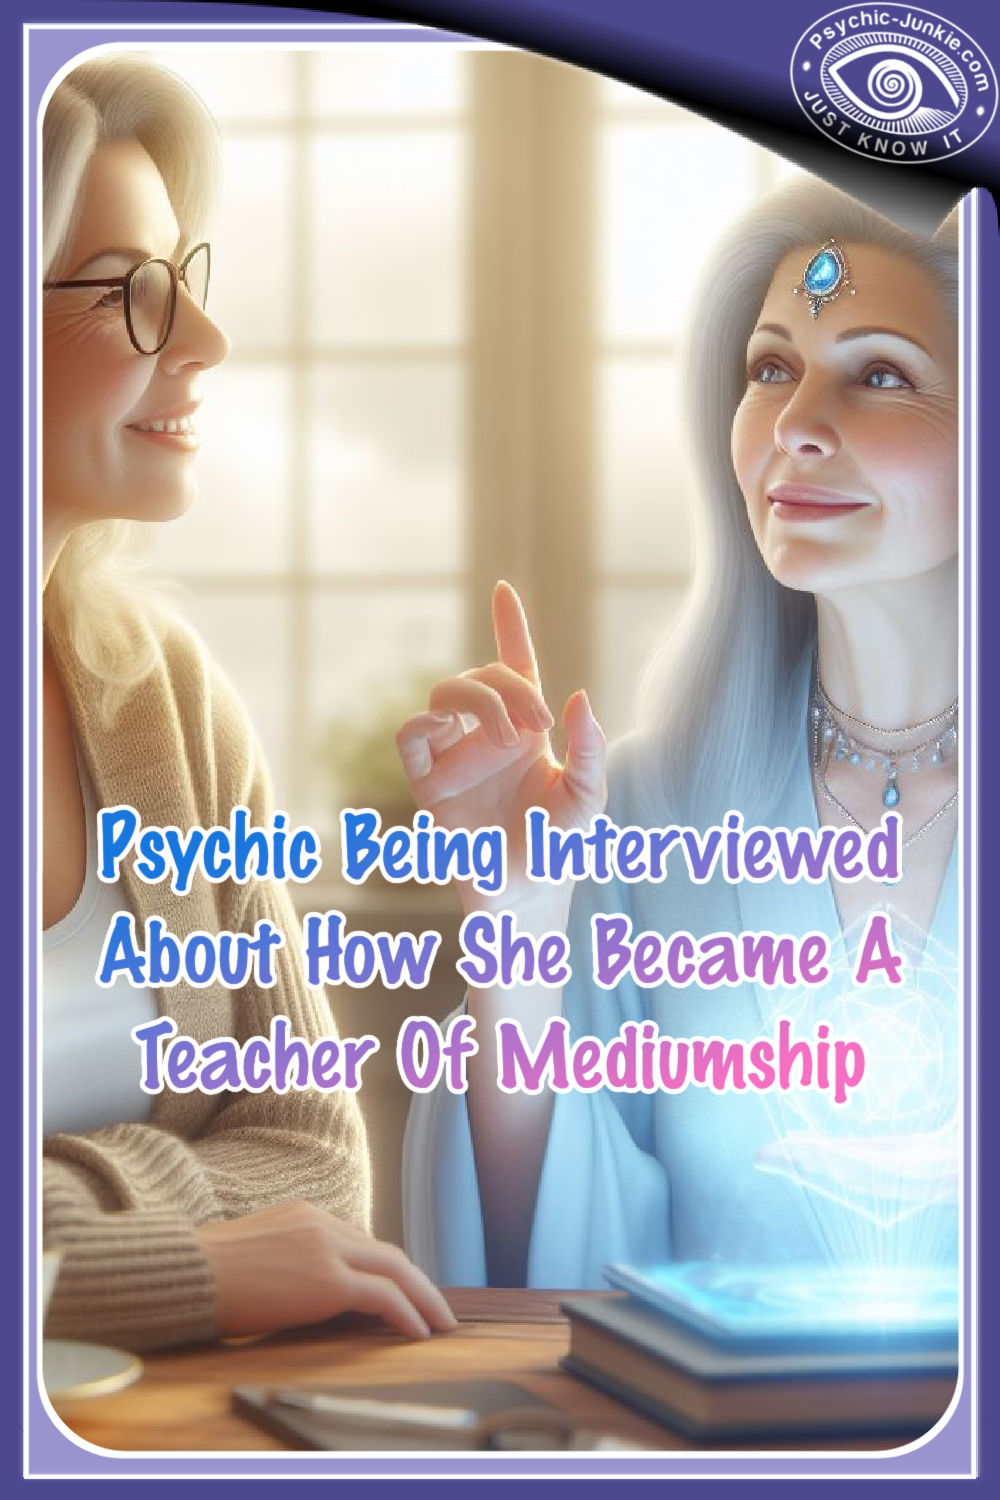 Psychic Being Interviewed About How She Became A Teacher Of Mediumship